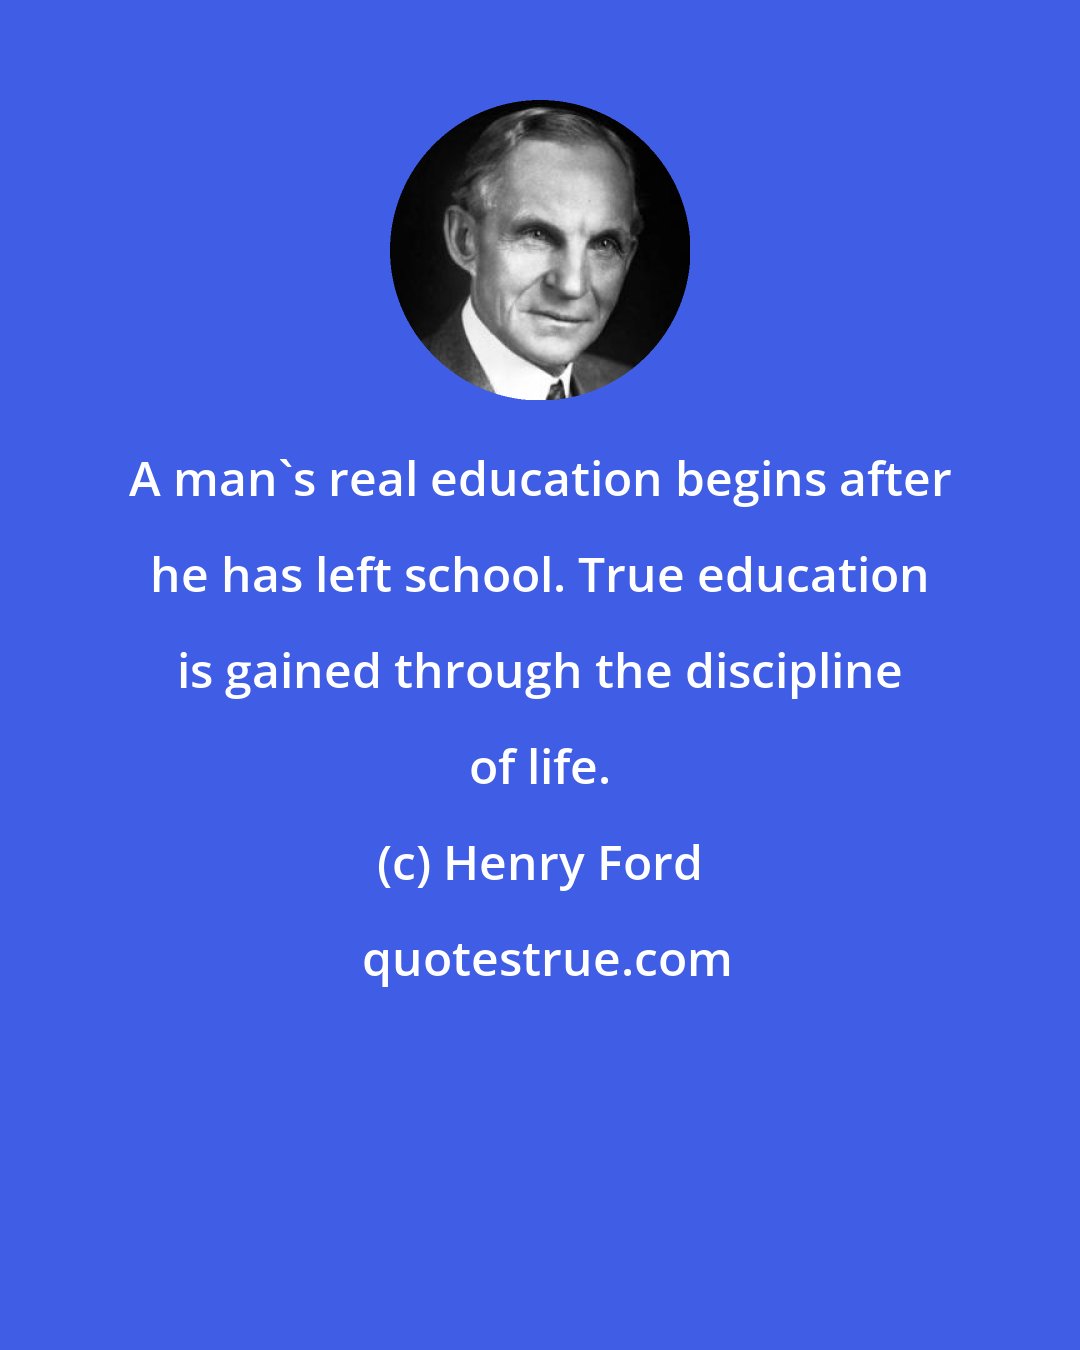 Henry Ford: A man's real education begins after he has left school. True education is gained through the discipline of life.